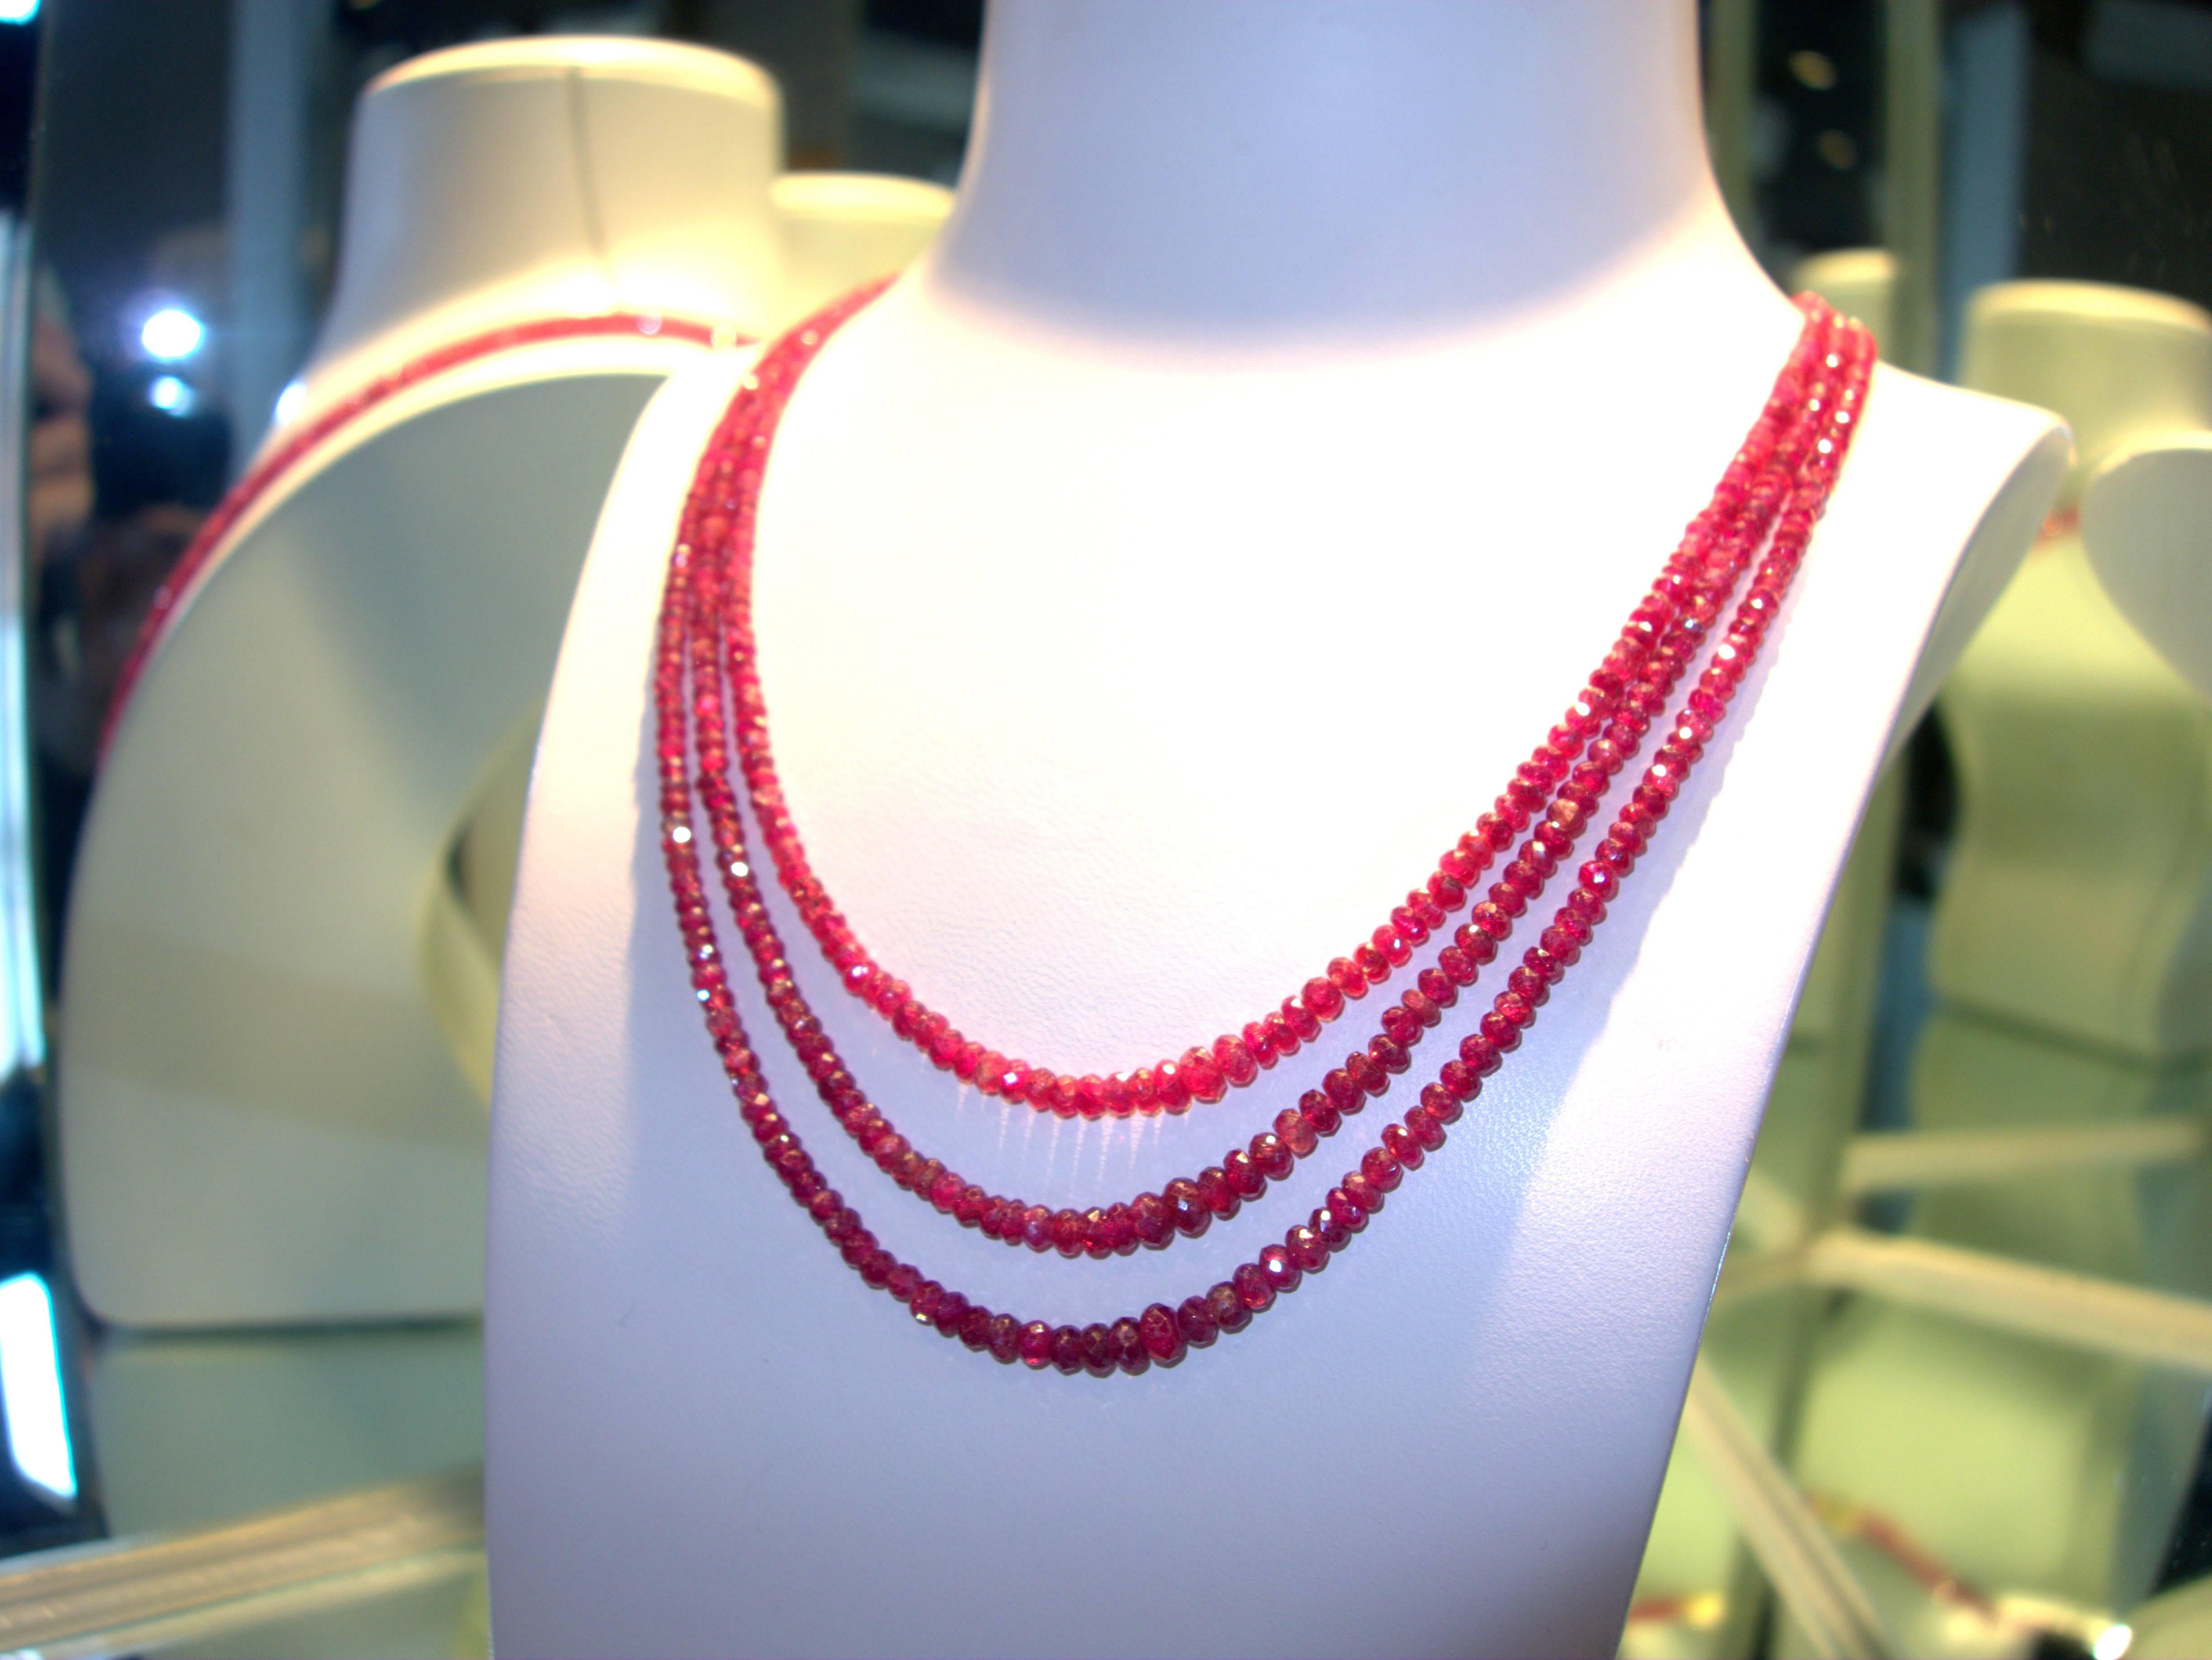 Finished with an 18K clasp, this three strand faceted ruby bead necklace is just over 20 inches in length.  It has approximately 200 cts of natural rubies.